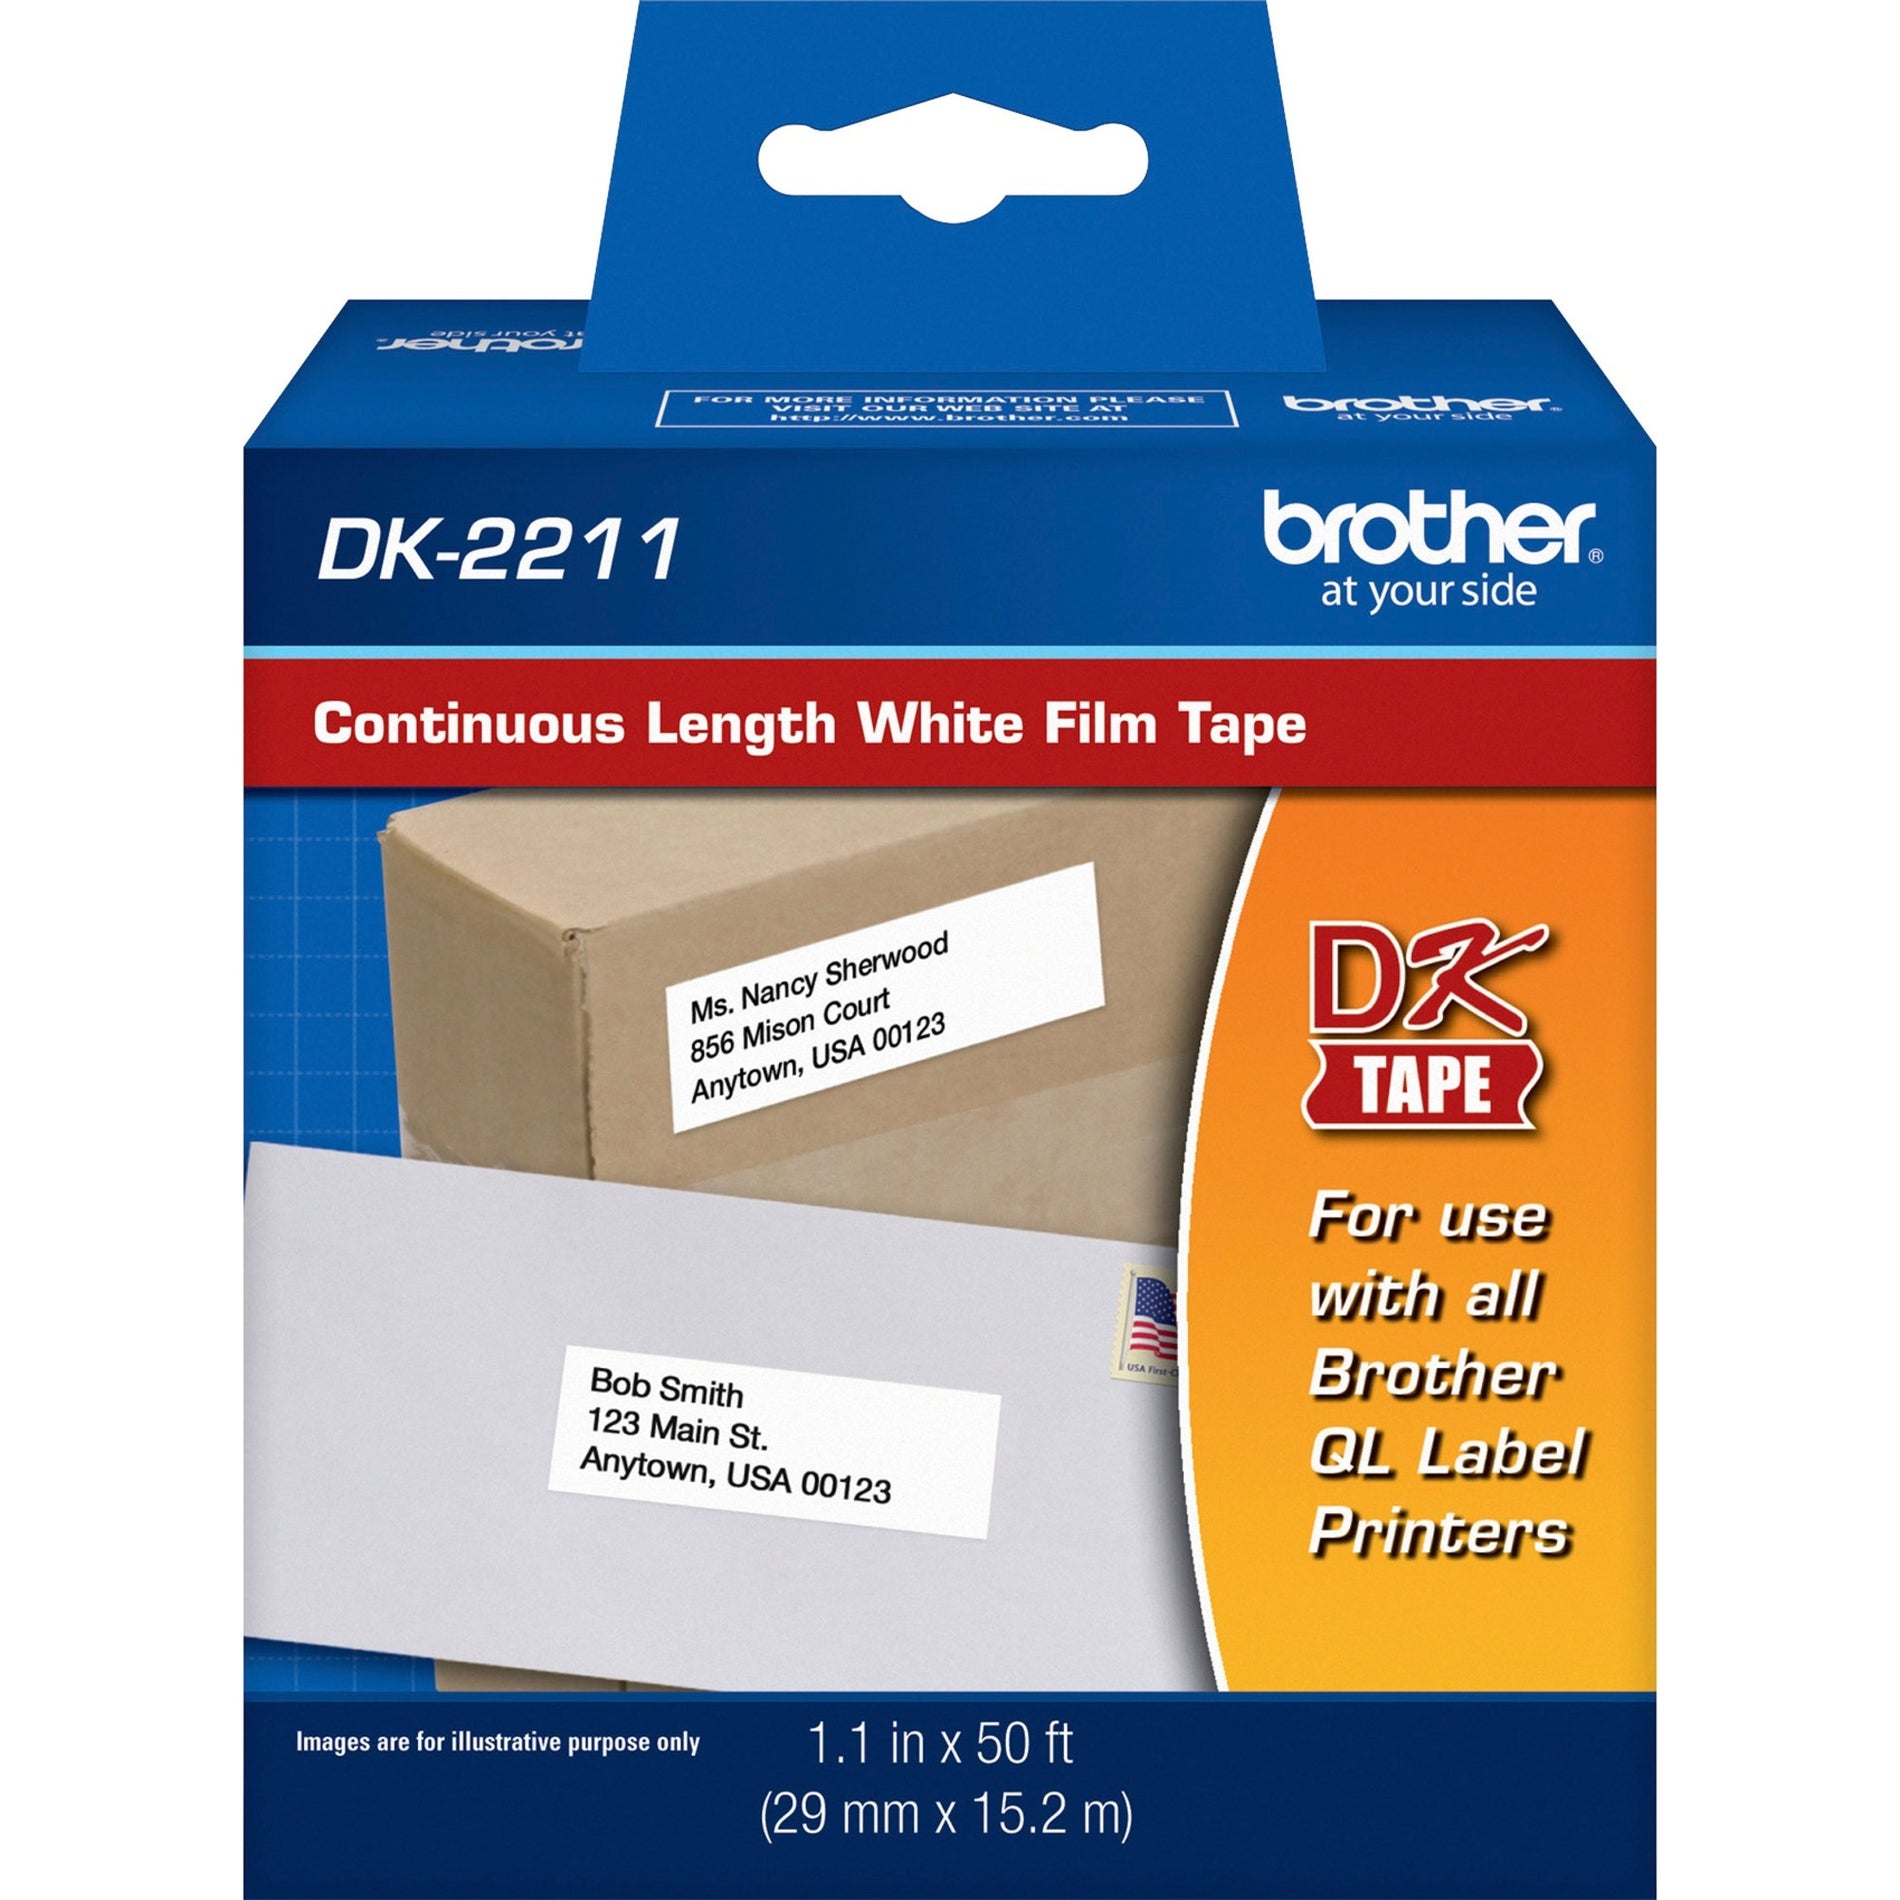 Brother DK2211 Continuous Length White Film DK Tape, Jam-free, 1 9/64" x 50 ft, Removable Adhesive